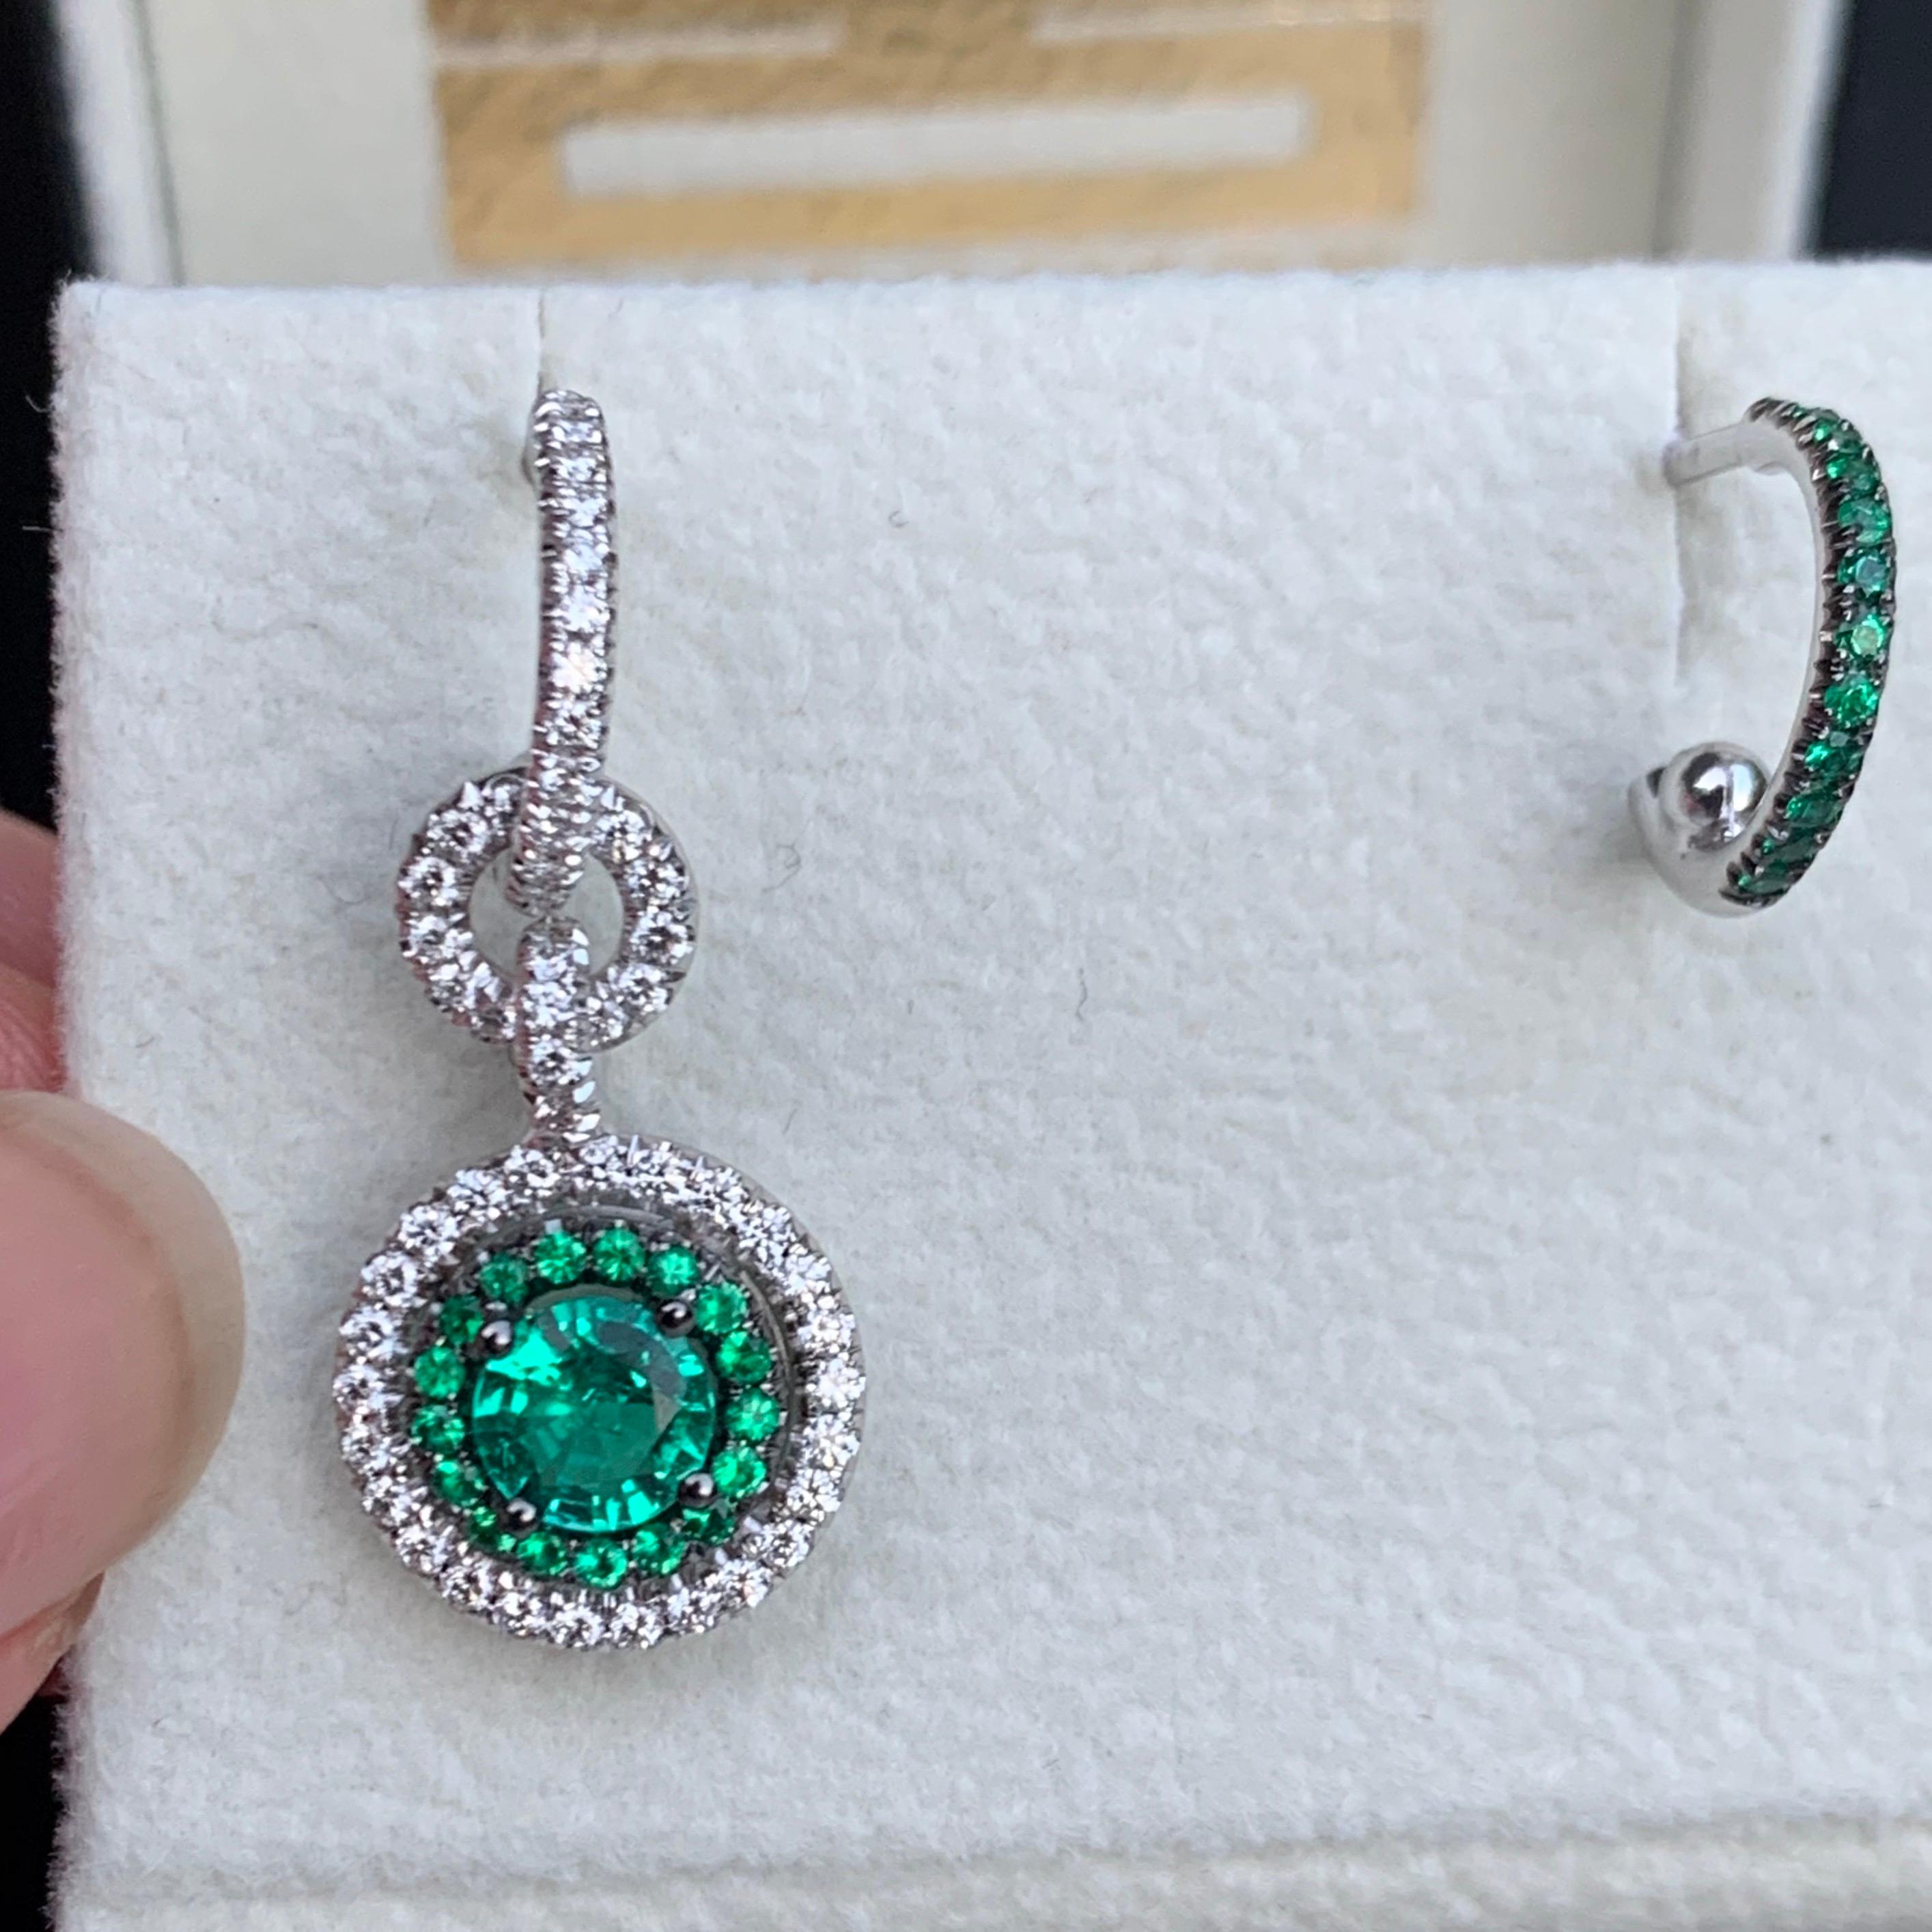 Round Cut Mismatched Colombian Emerald and Diamond Earrings & Enhancer Bail